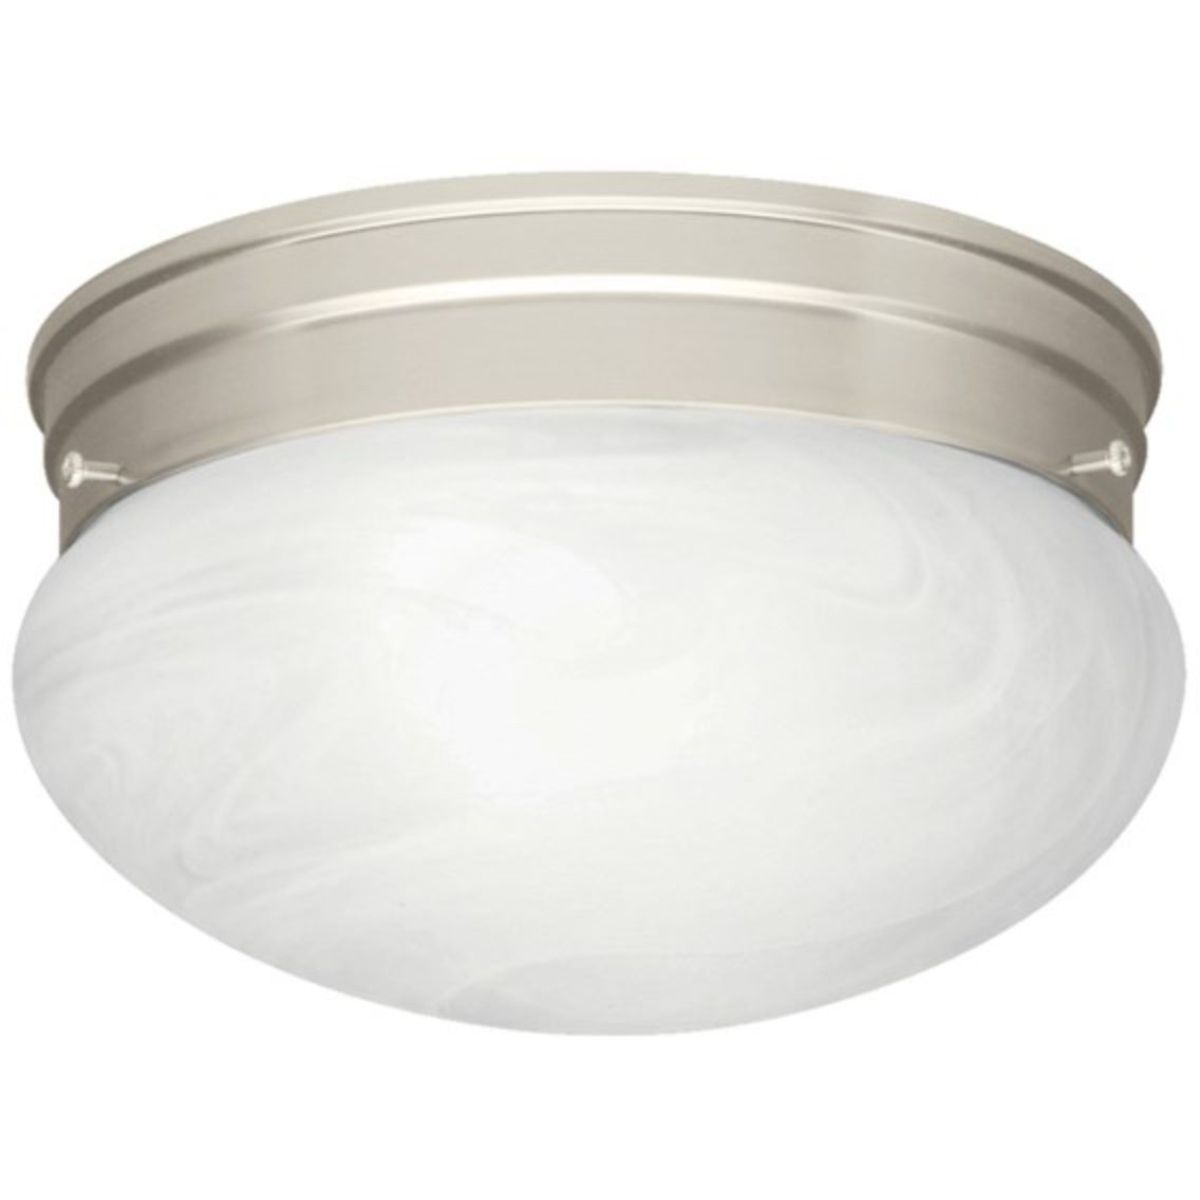 Ceiling Space 8 in. Puff Light Brushed Nickel finish (Case of 12)